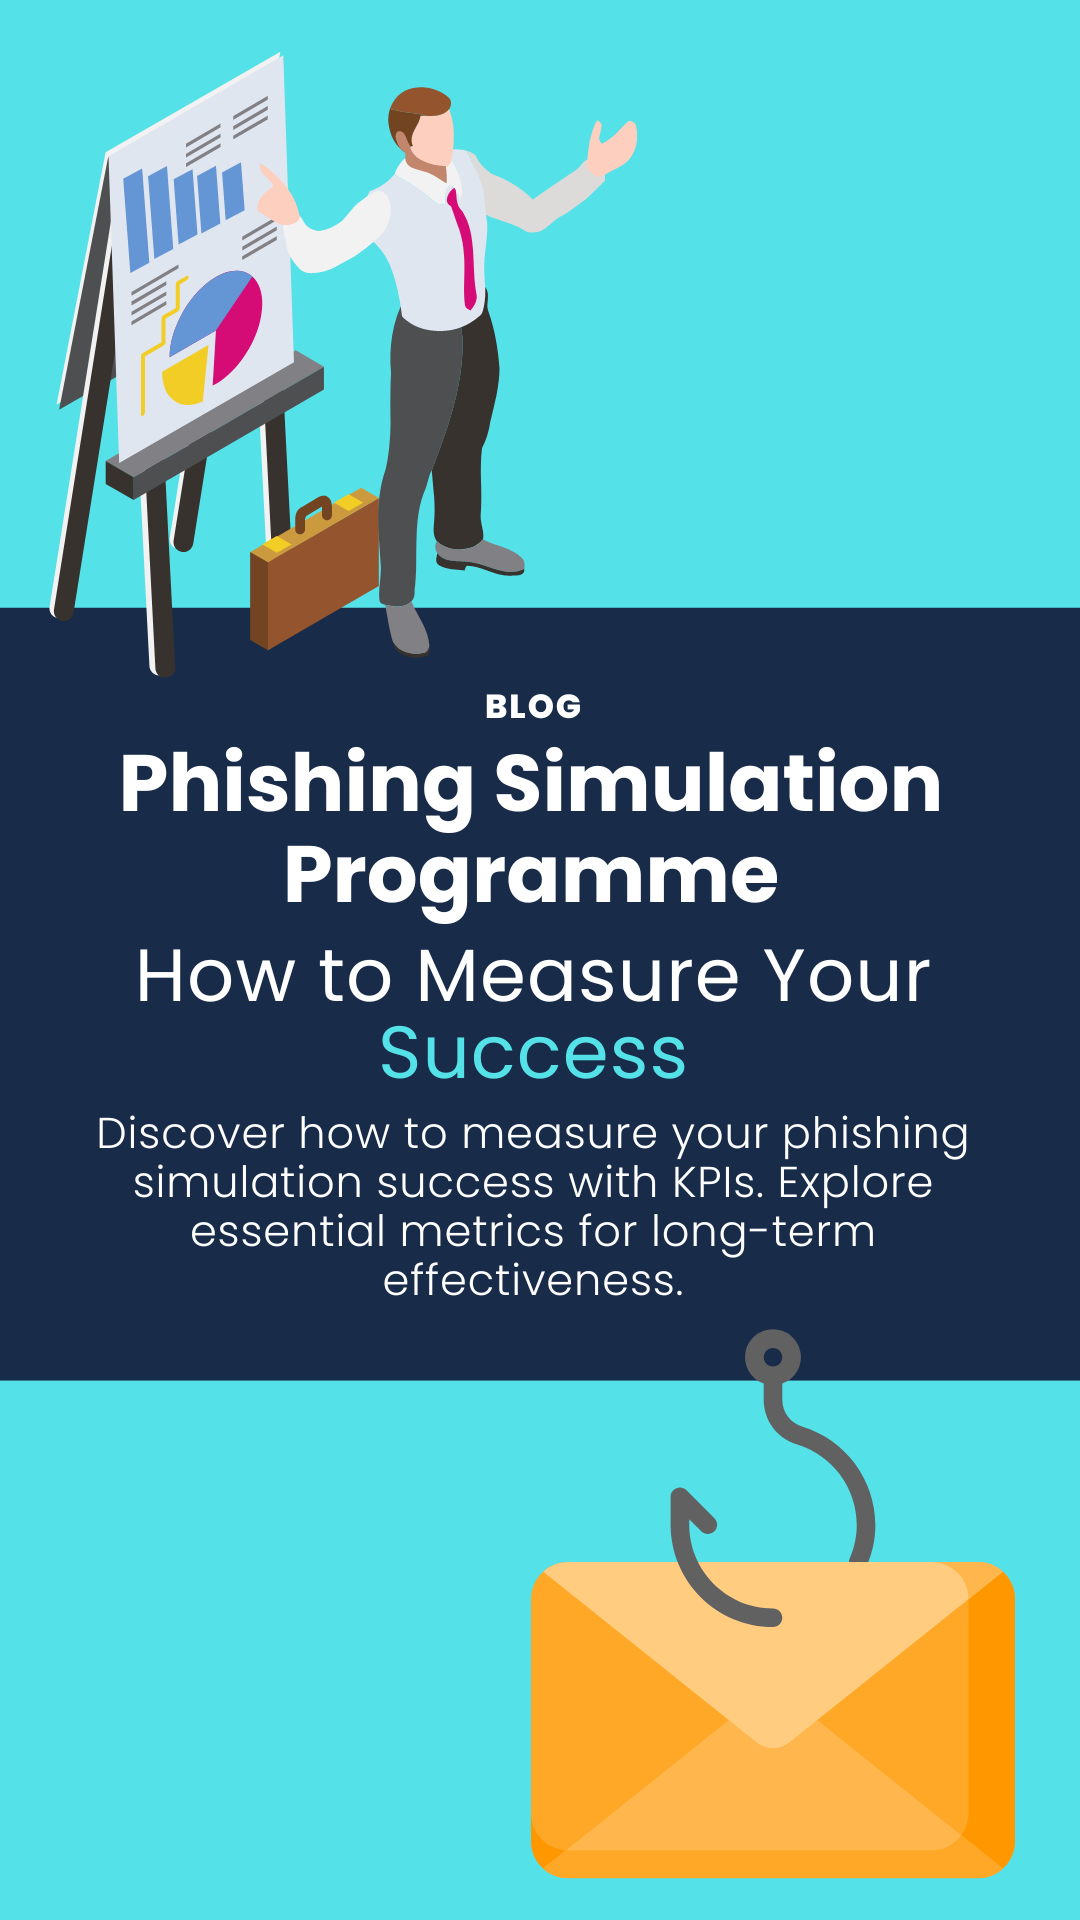 Blog image with the title of the blog and summary of measuring key performance indicators from phishing simulation programme